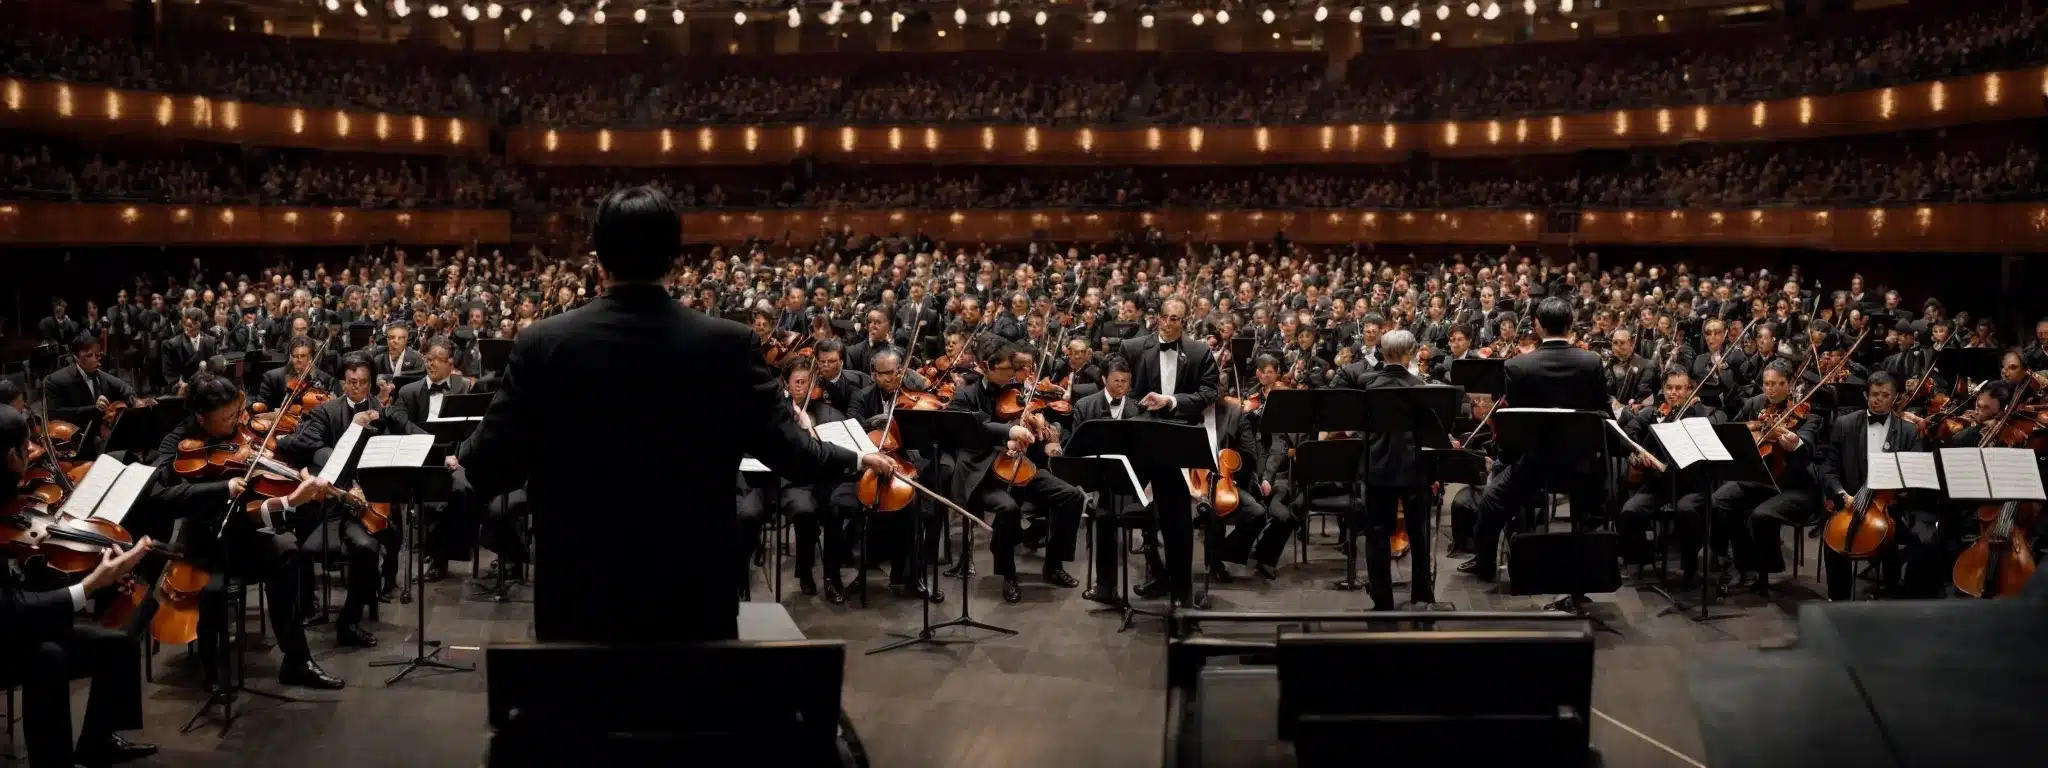 A Conductor Stands On Stage, Leading An Orchestra In Perfect Harmony In Front Of An Enraptured Audience.